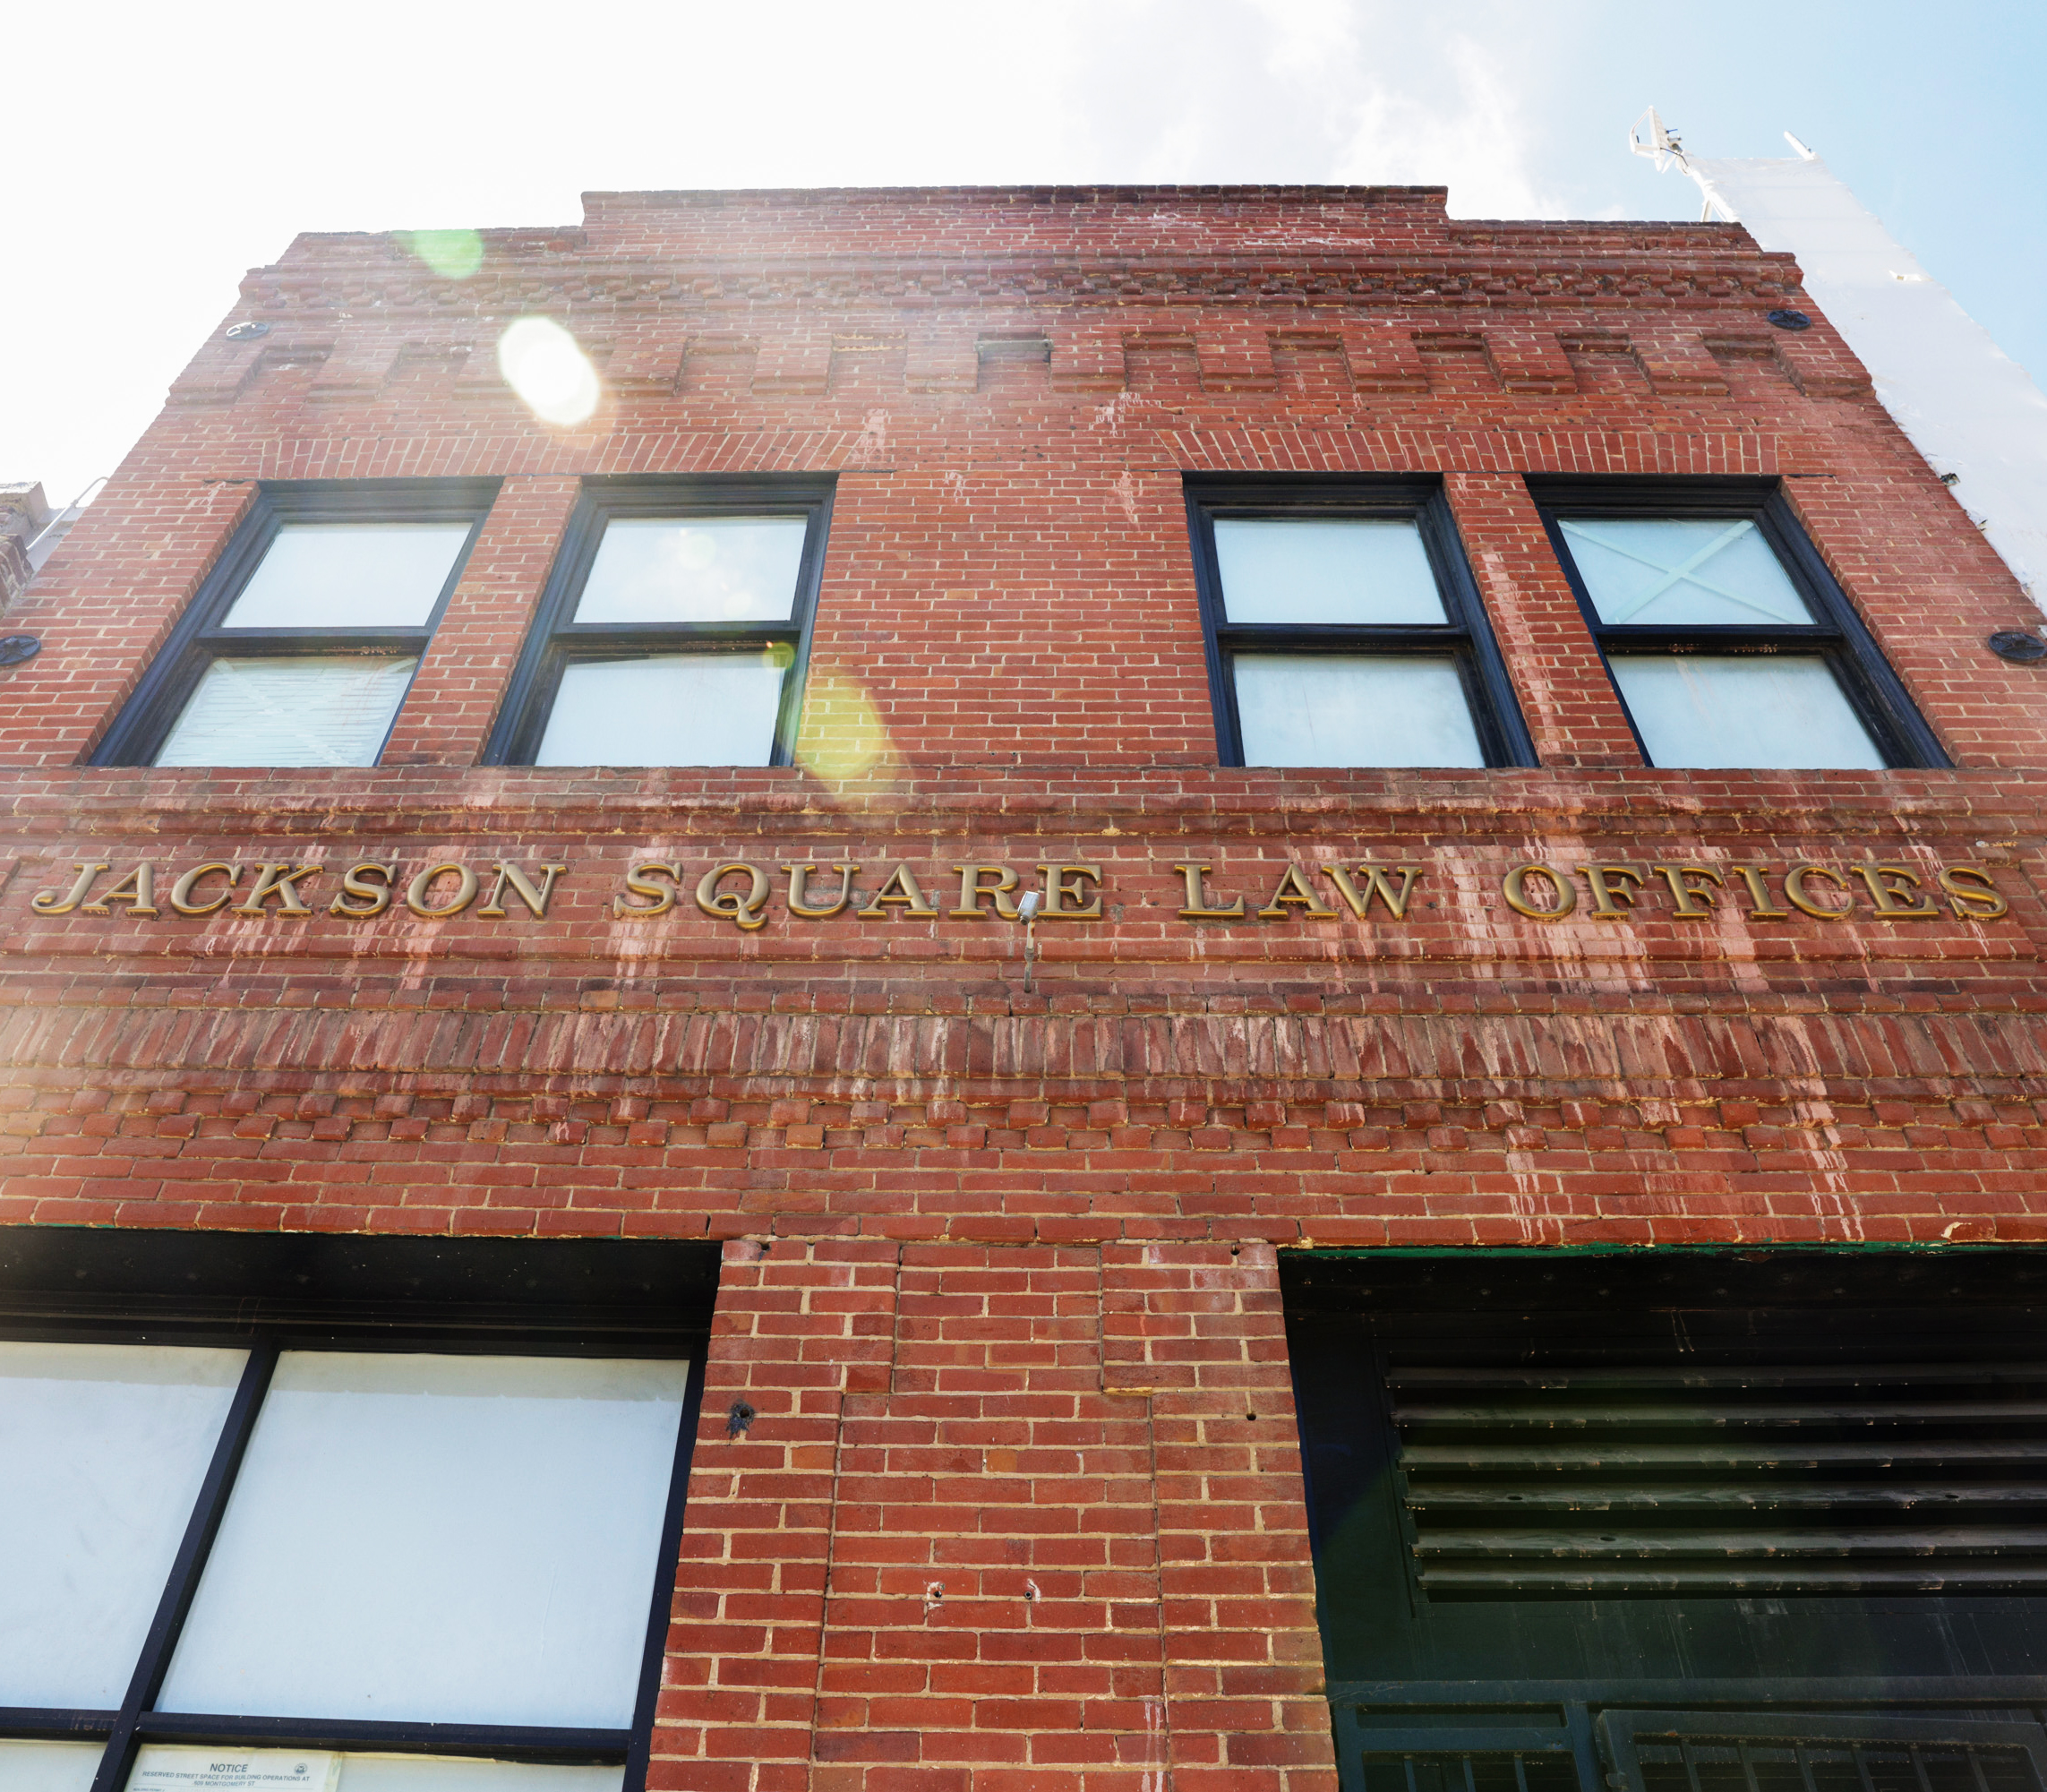 A brick building with &quot;JACKSON SQUARE LAW OFFICES&quot; on the facade, featuring two windows and lens flare from the sun.